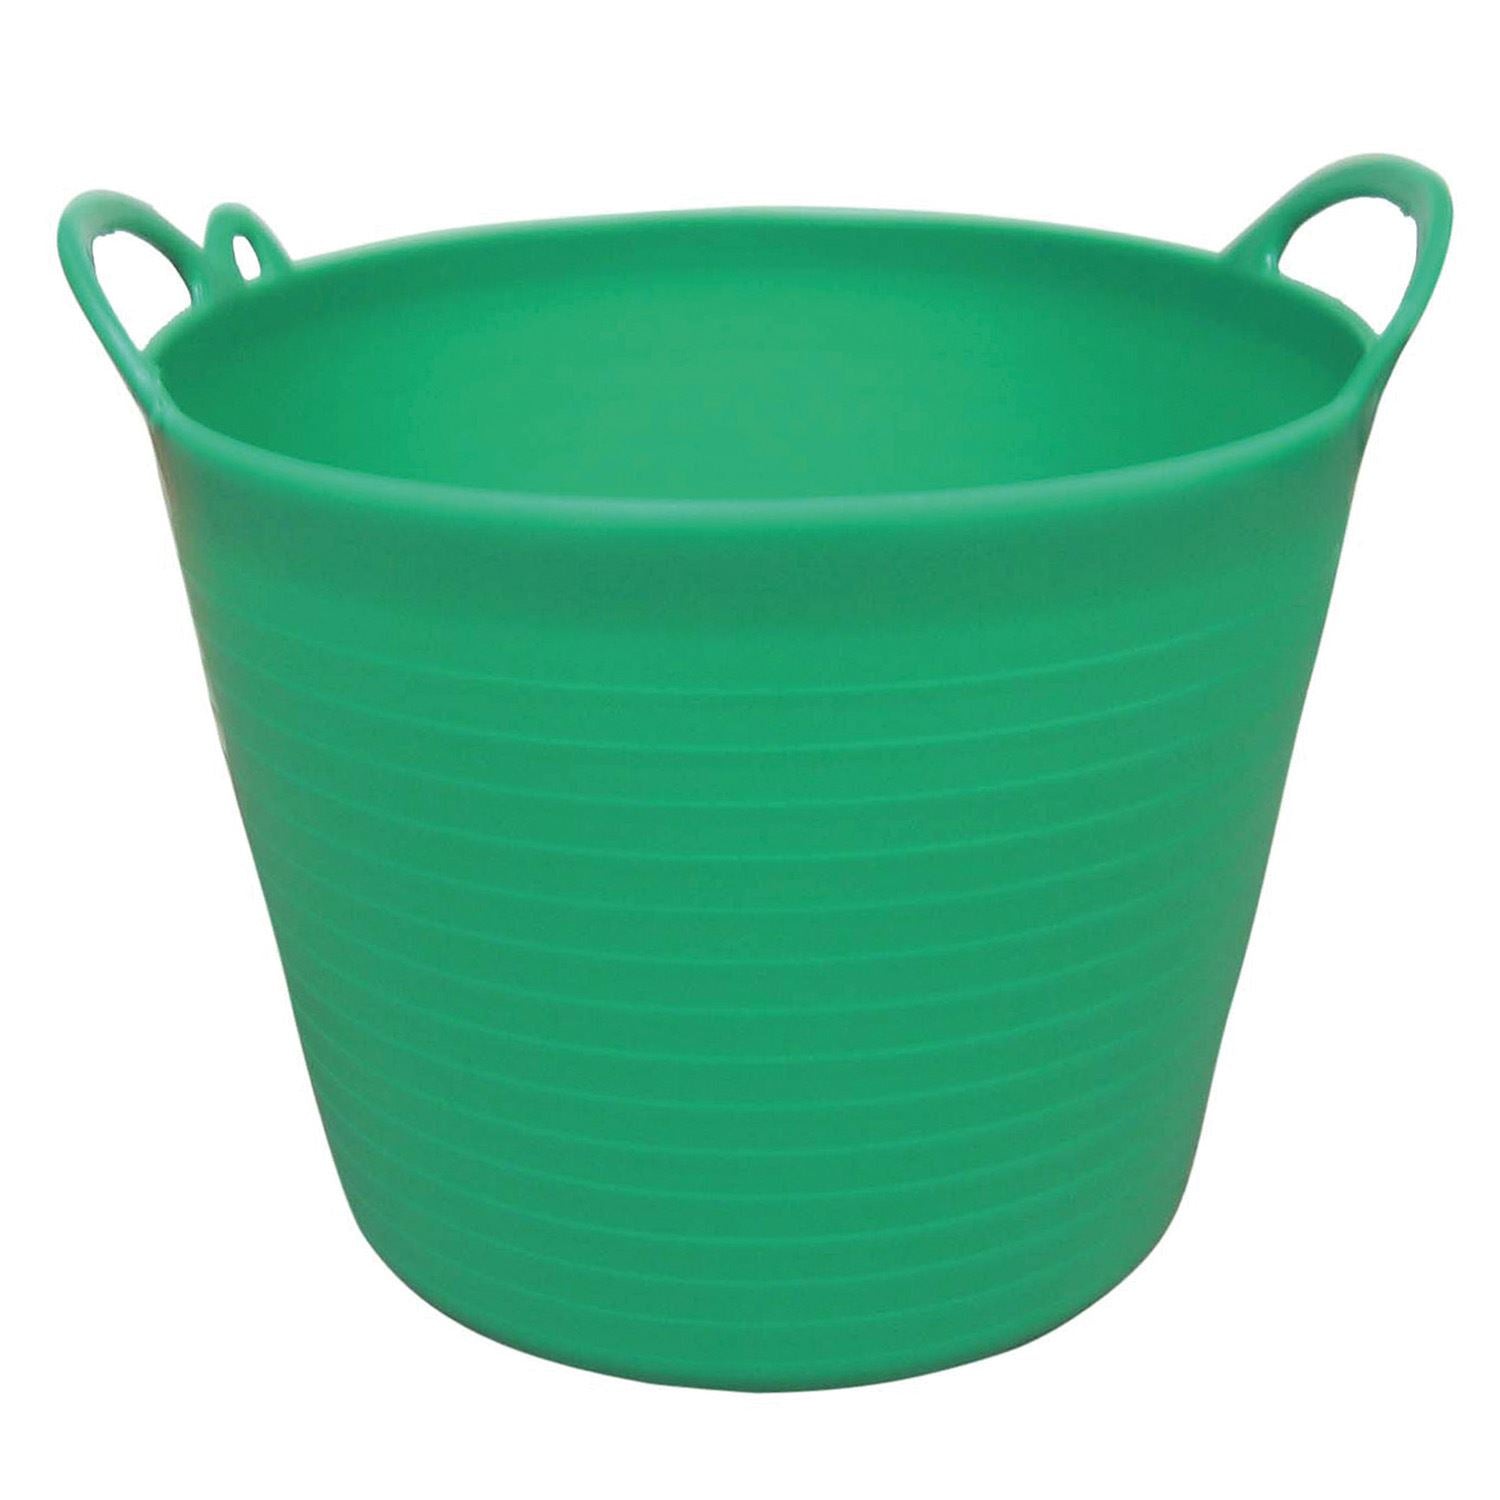 Prostable Flexi Feed Tub - Just Horse Riders